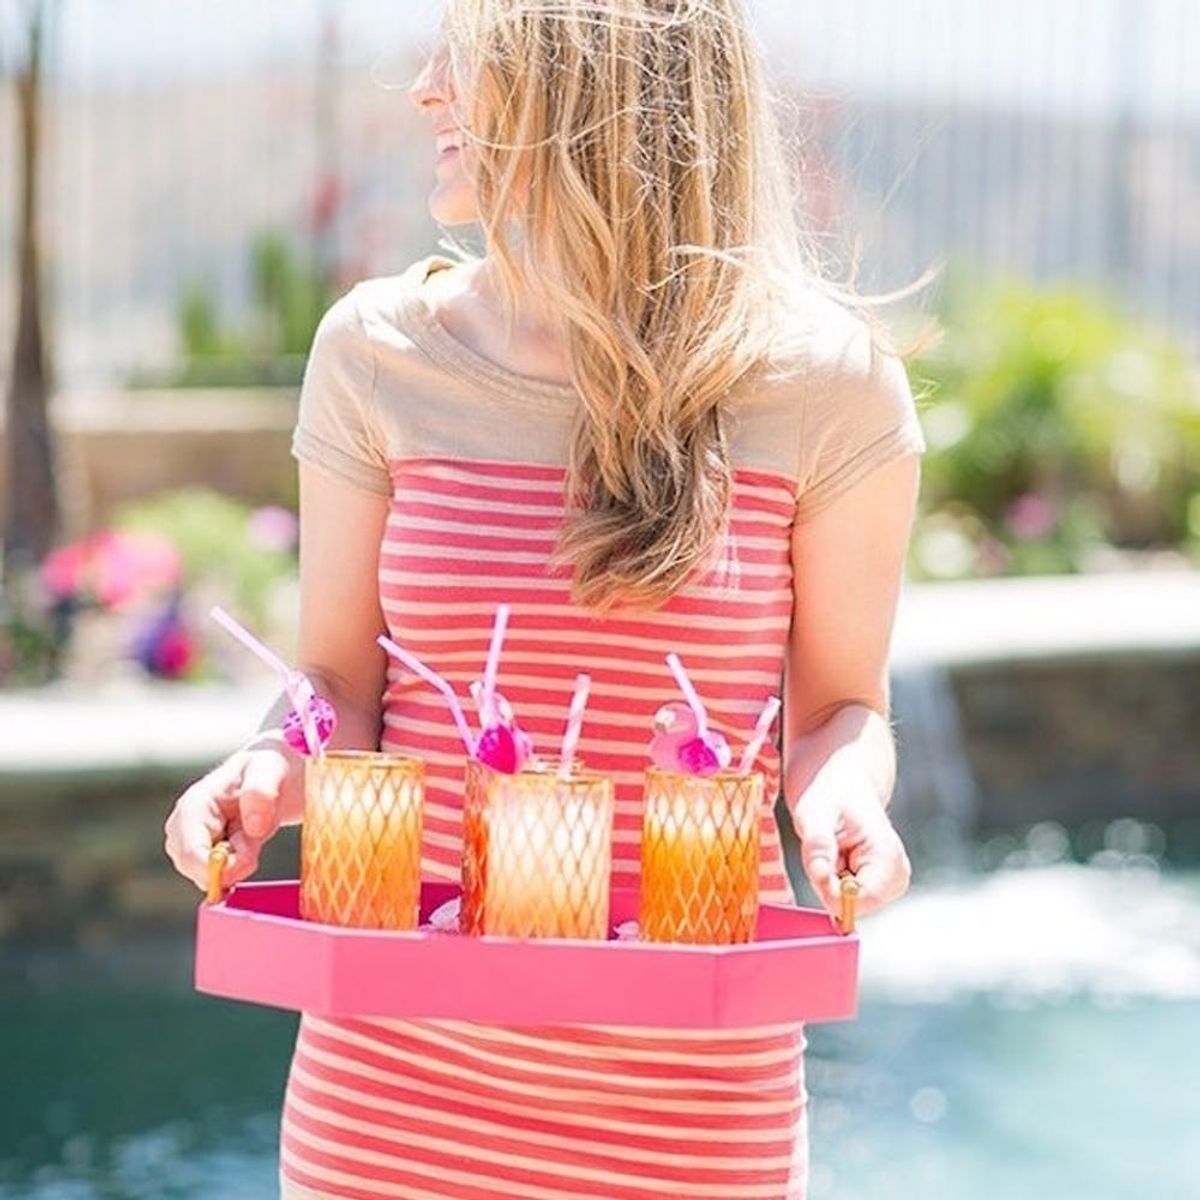 Host a Wine-Slushie Party With These 9 Cool Ideas